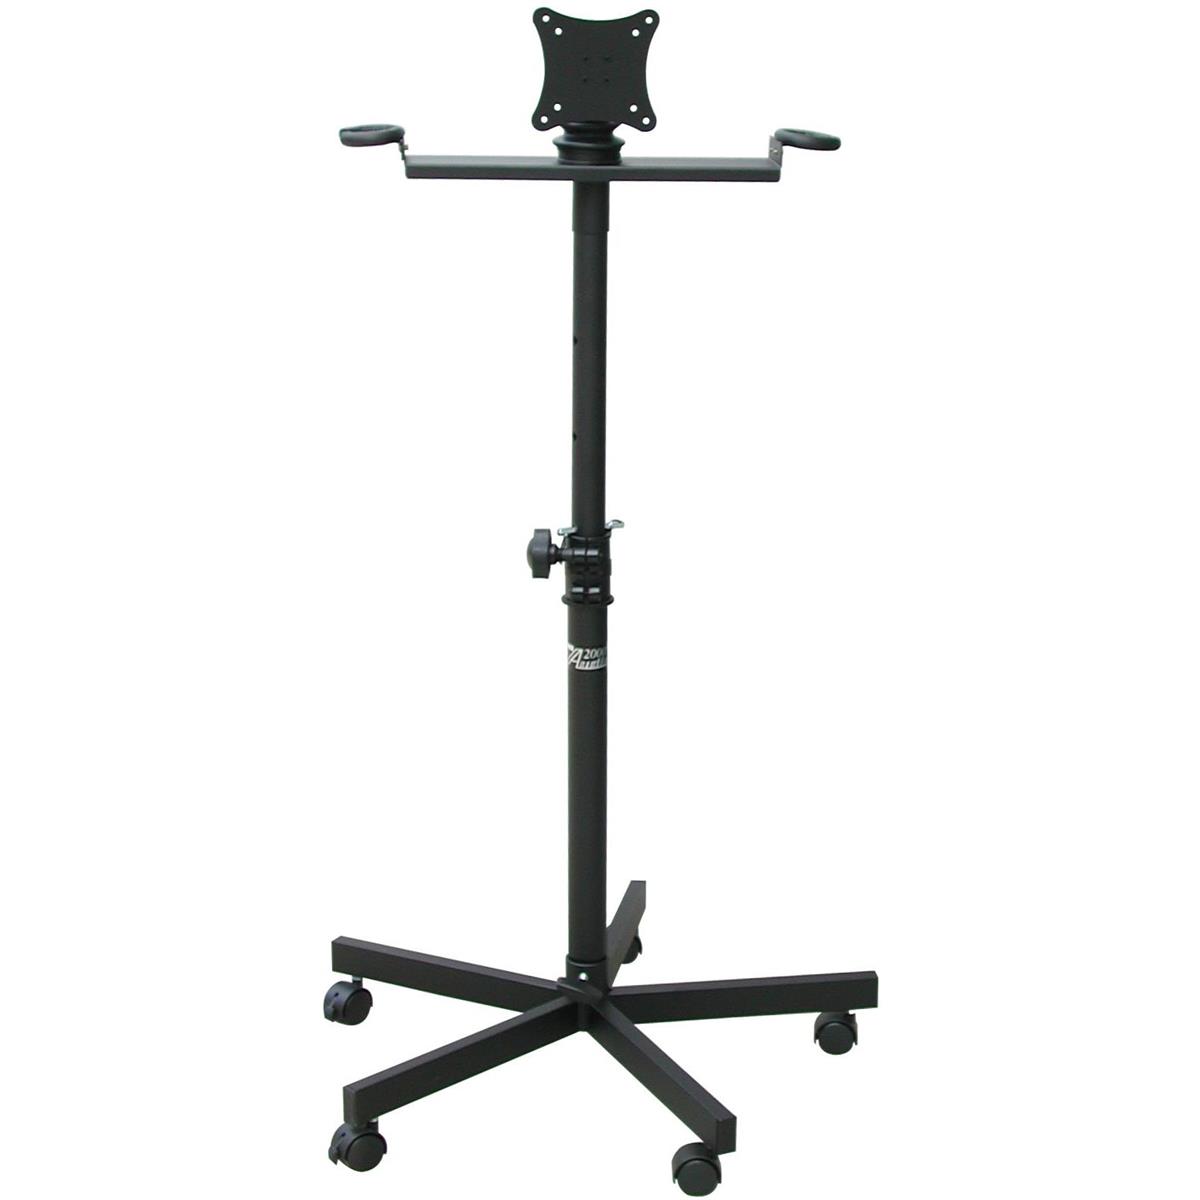 Audio 2000s Karaoke Stand with 5 Legs & Casters for Flat Panel TV/Monitor, Black -  AST420X